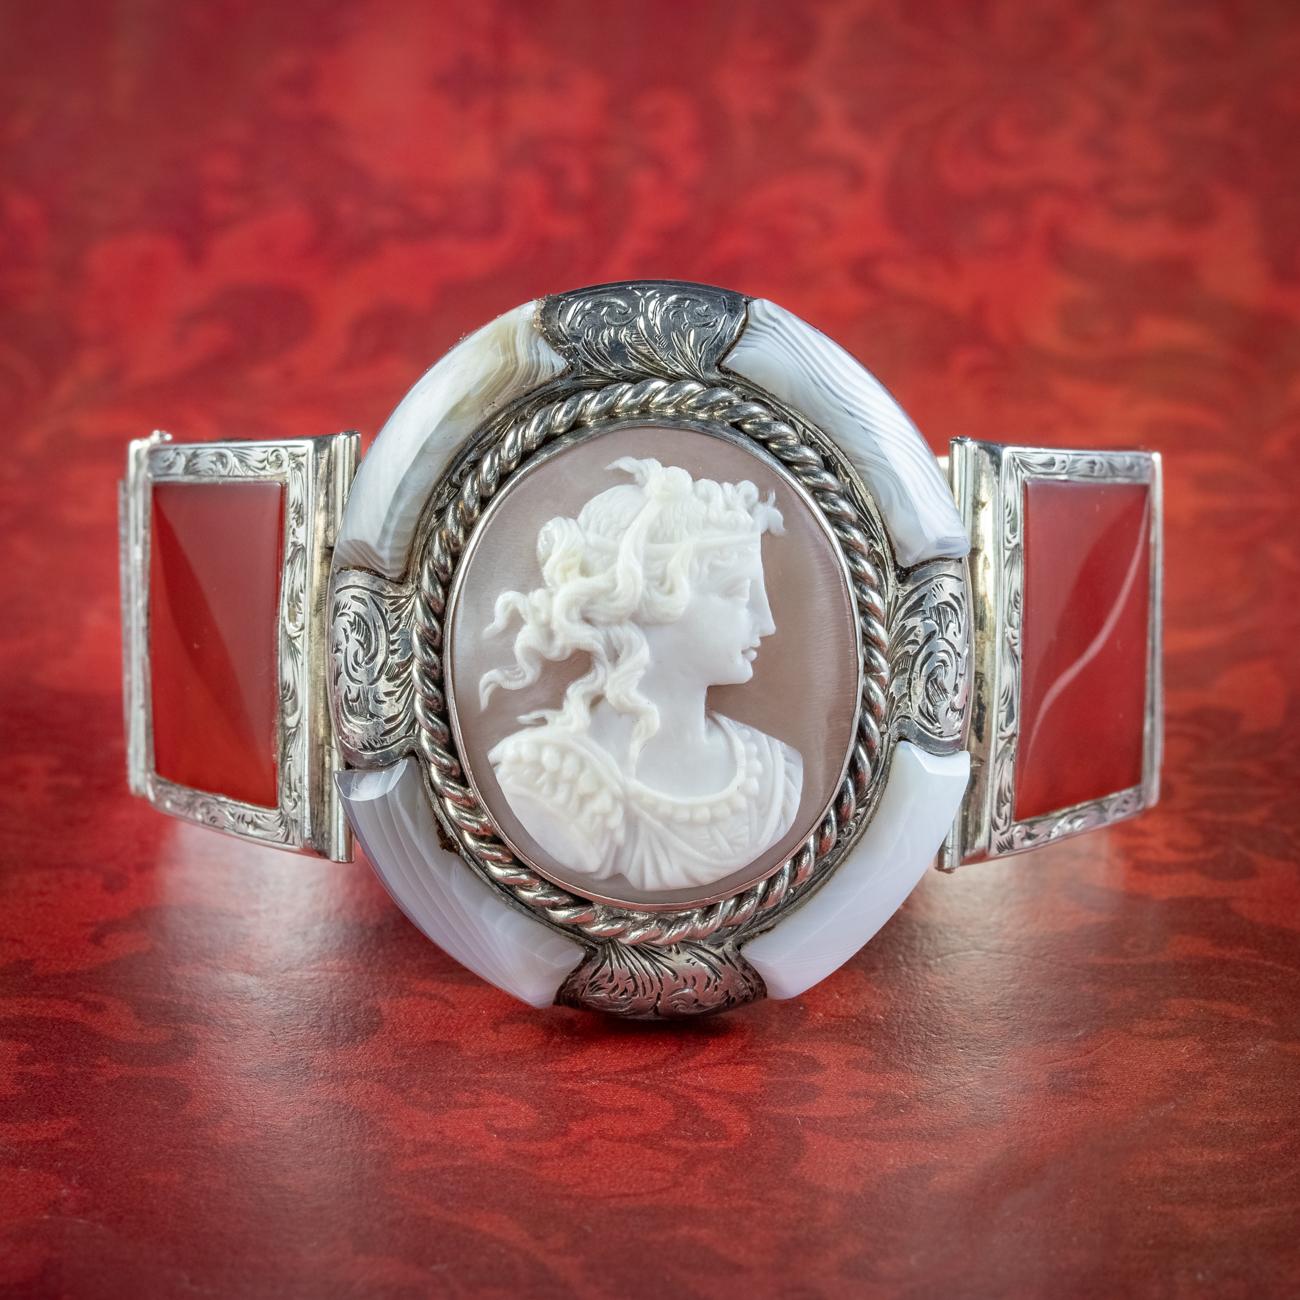 A remarkable antique Scottish bracelet from the mid-Victorian era featuring an exquisite hand-carved bullmouth shell cameo in the centre, depicting the side profile of a character from Roman mythology, possibly the God Apollo who is intricately